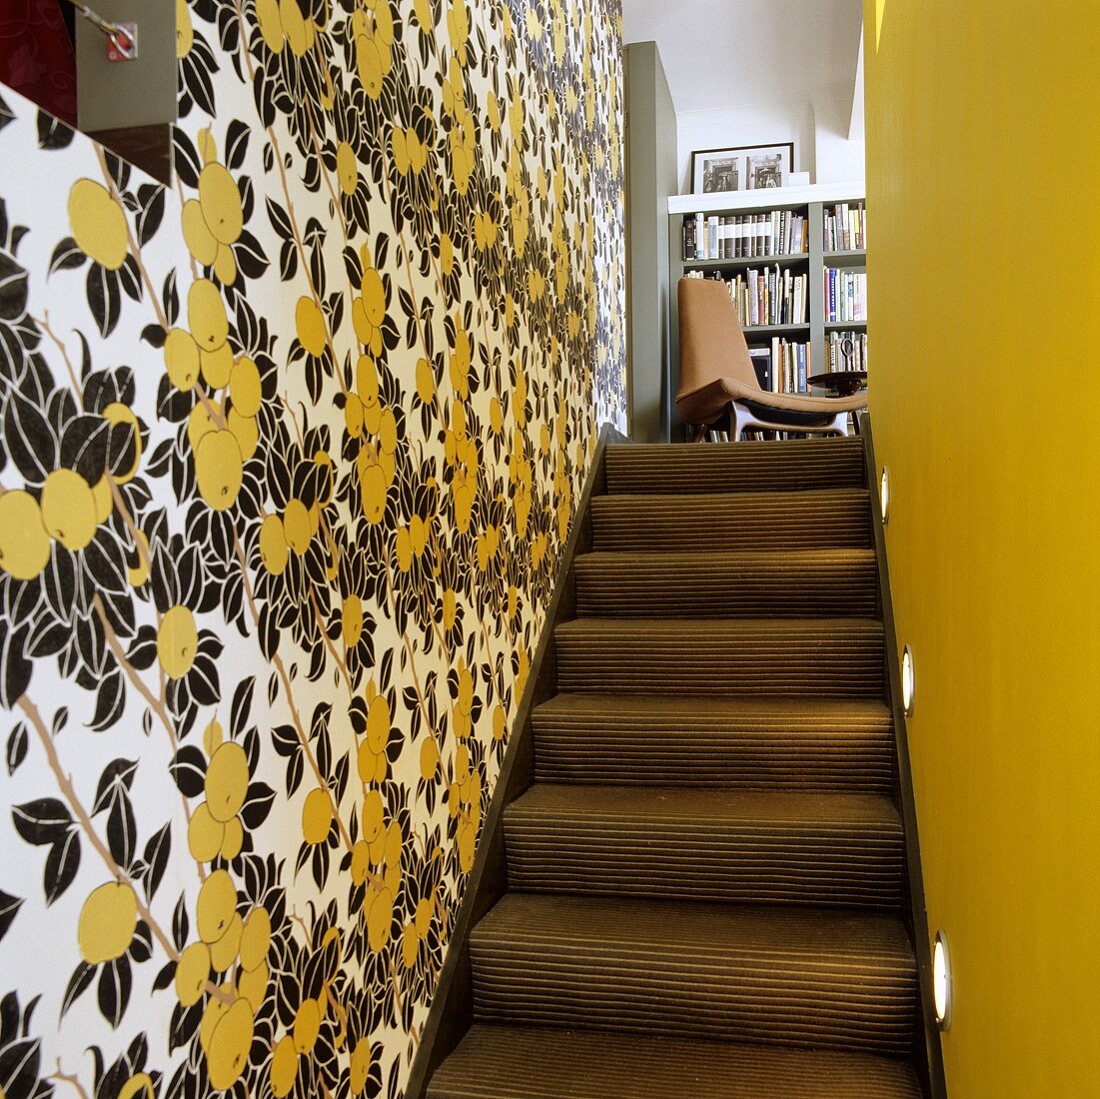 A narrow stairway with a flower-patterned papered wall and a yellow-painted wall with a view onto a chair